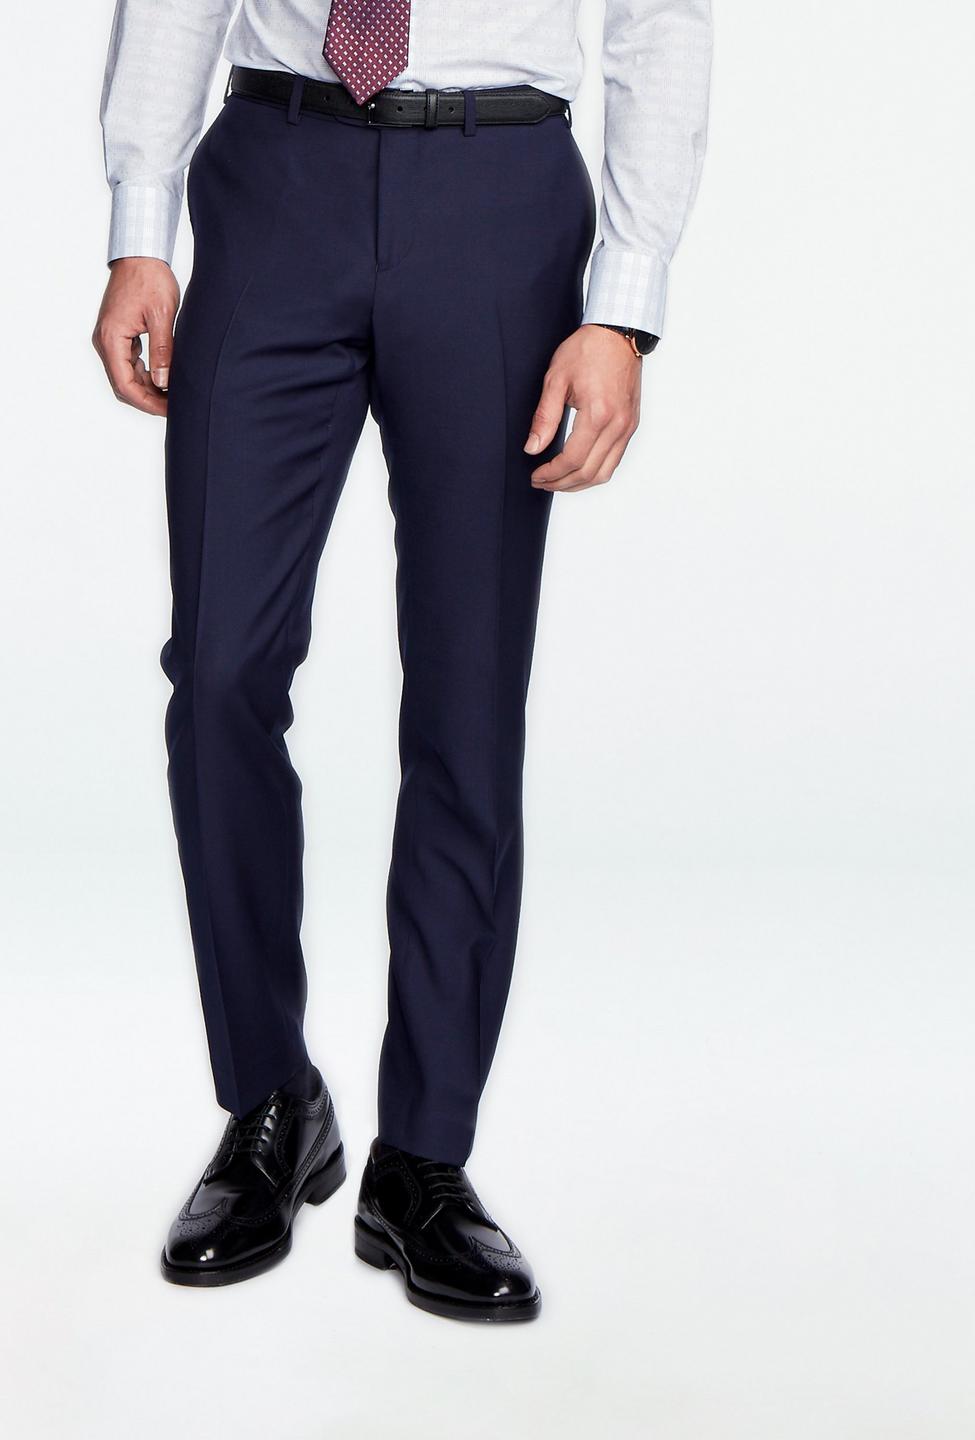 Navy pants - Hemsworth Solid Design from Premium Indochino Collection